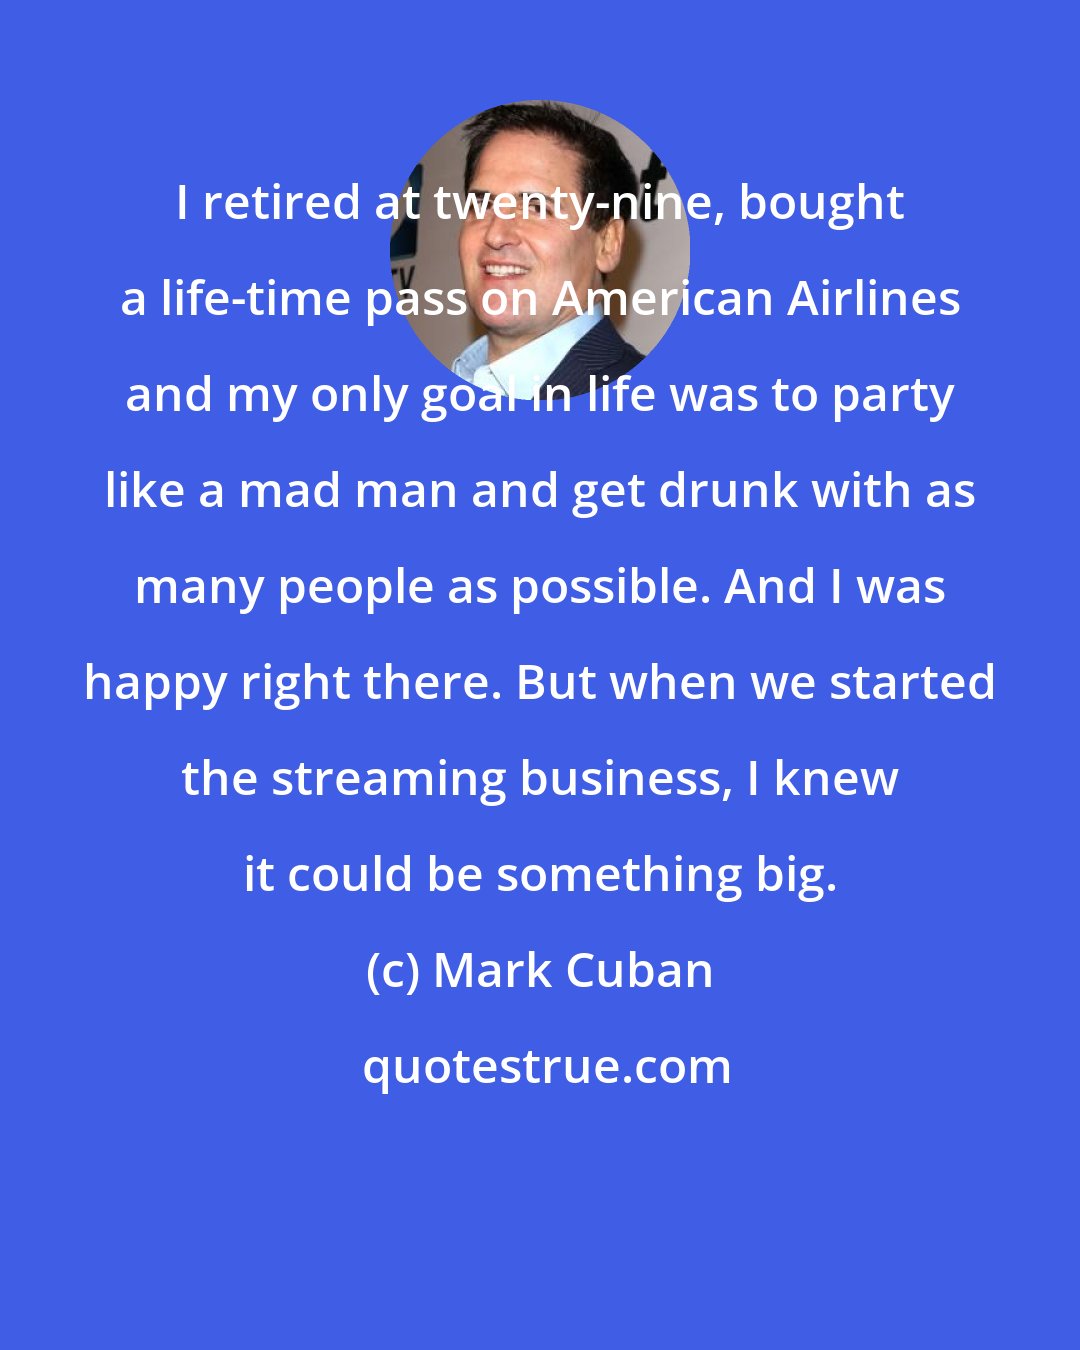 Mark Cuban: I retired at twenty-nine, bought a life-time pass on American Airlines and my only goal in life was to party like a mad man and get drunk with as many people as possible. And I was happy right there. But when we started the streaming business, I knew it could be something big.